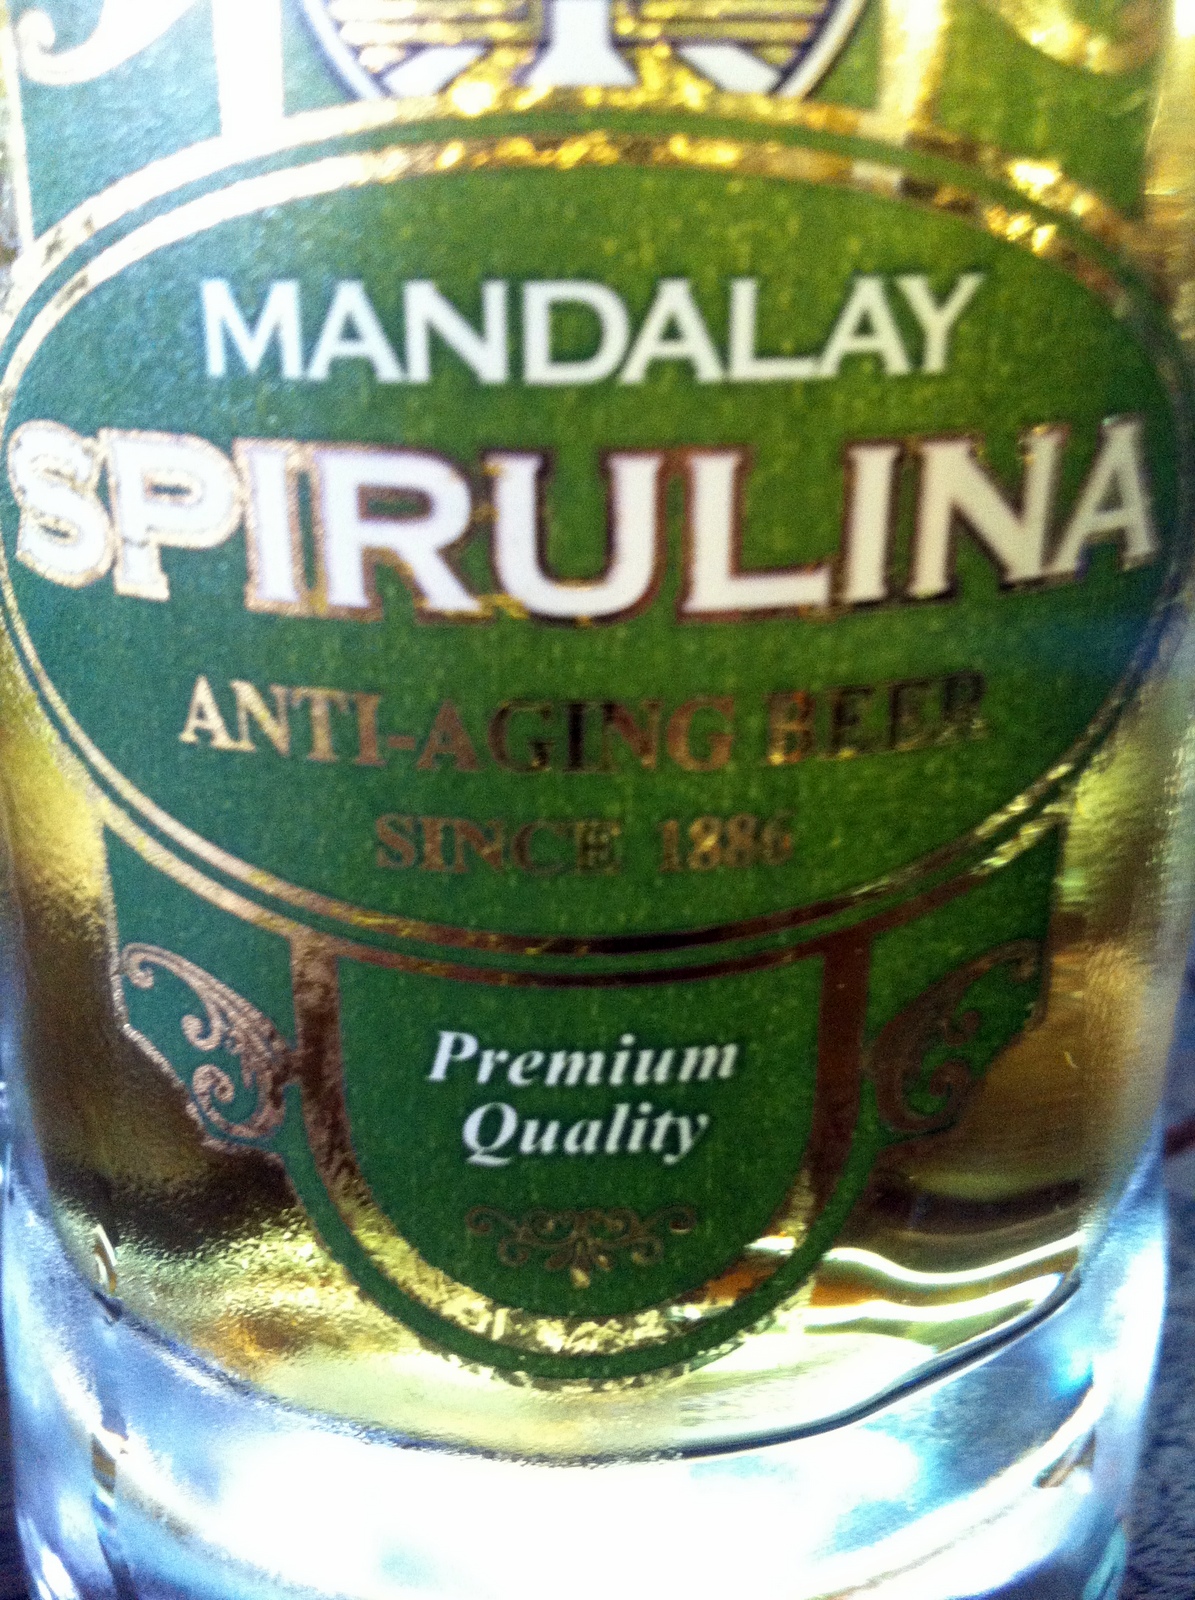 spirunlina-beer-makes-you-younger